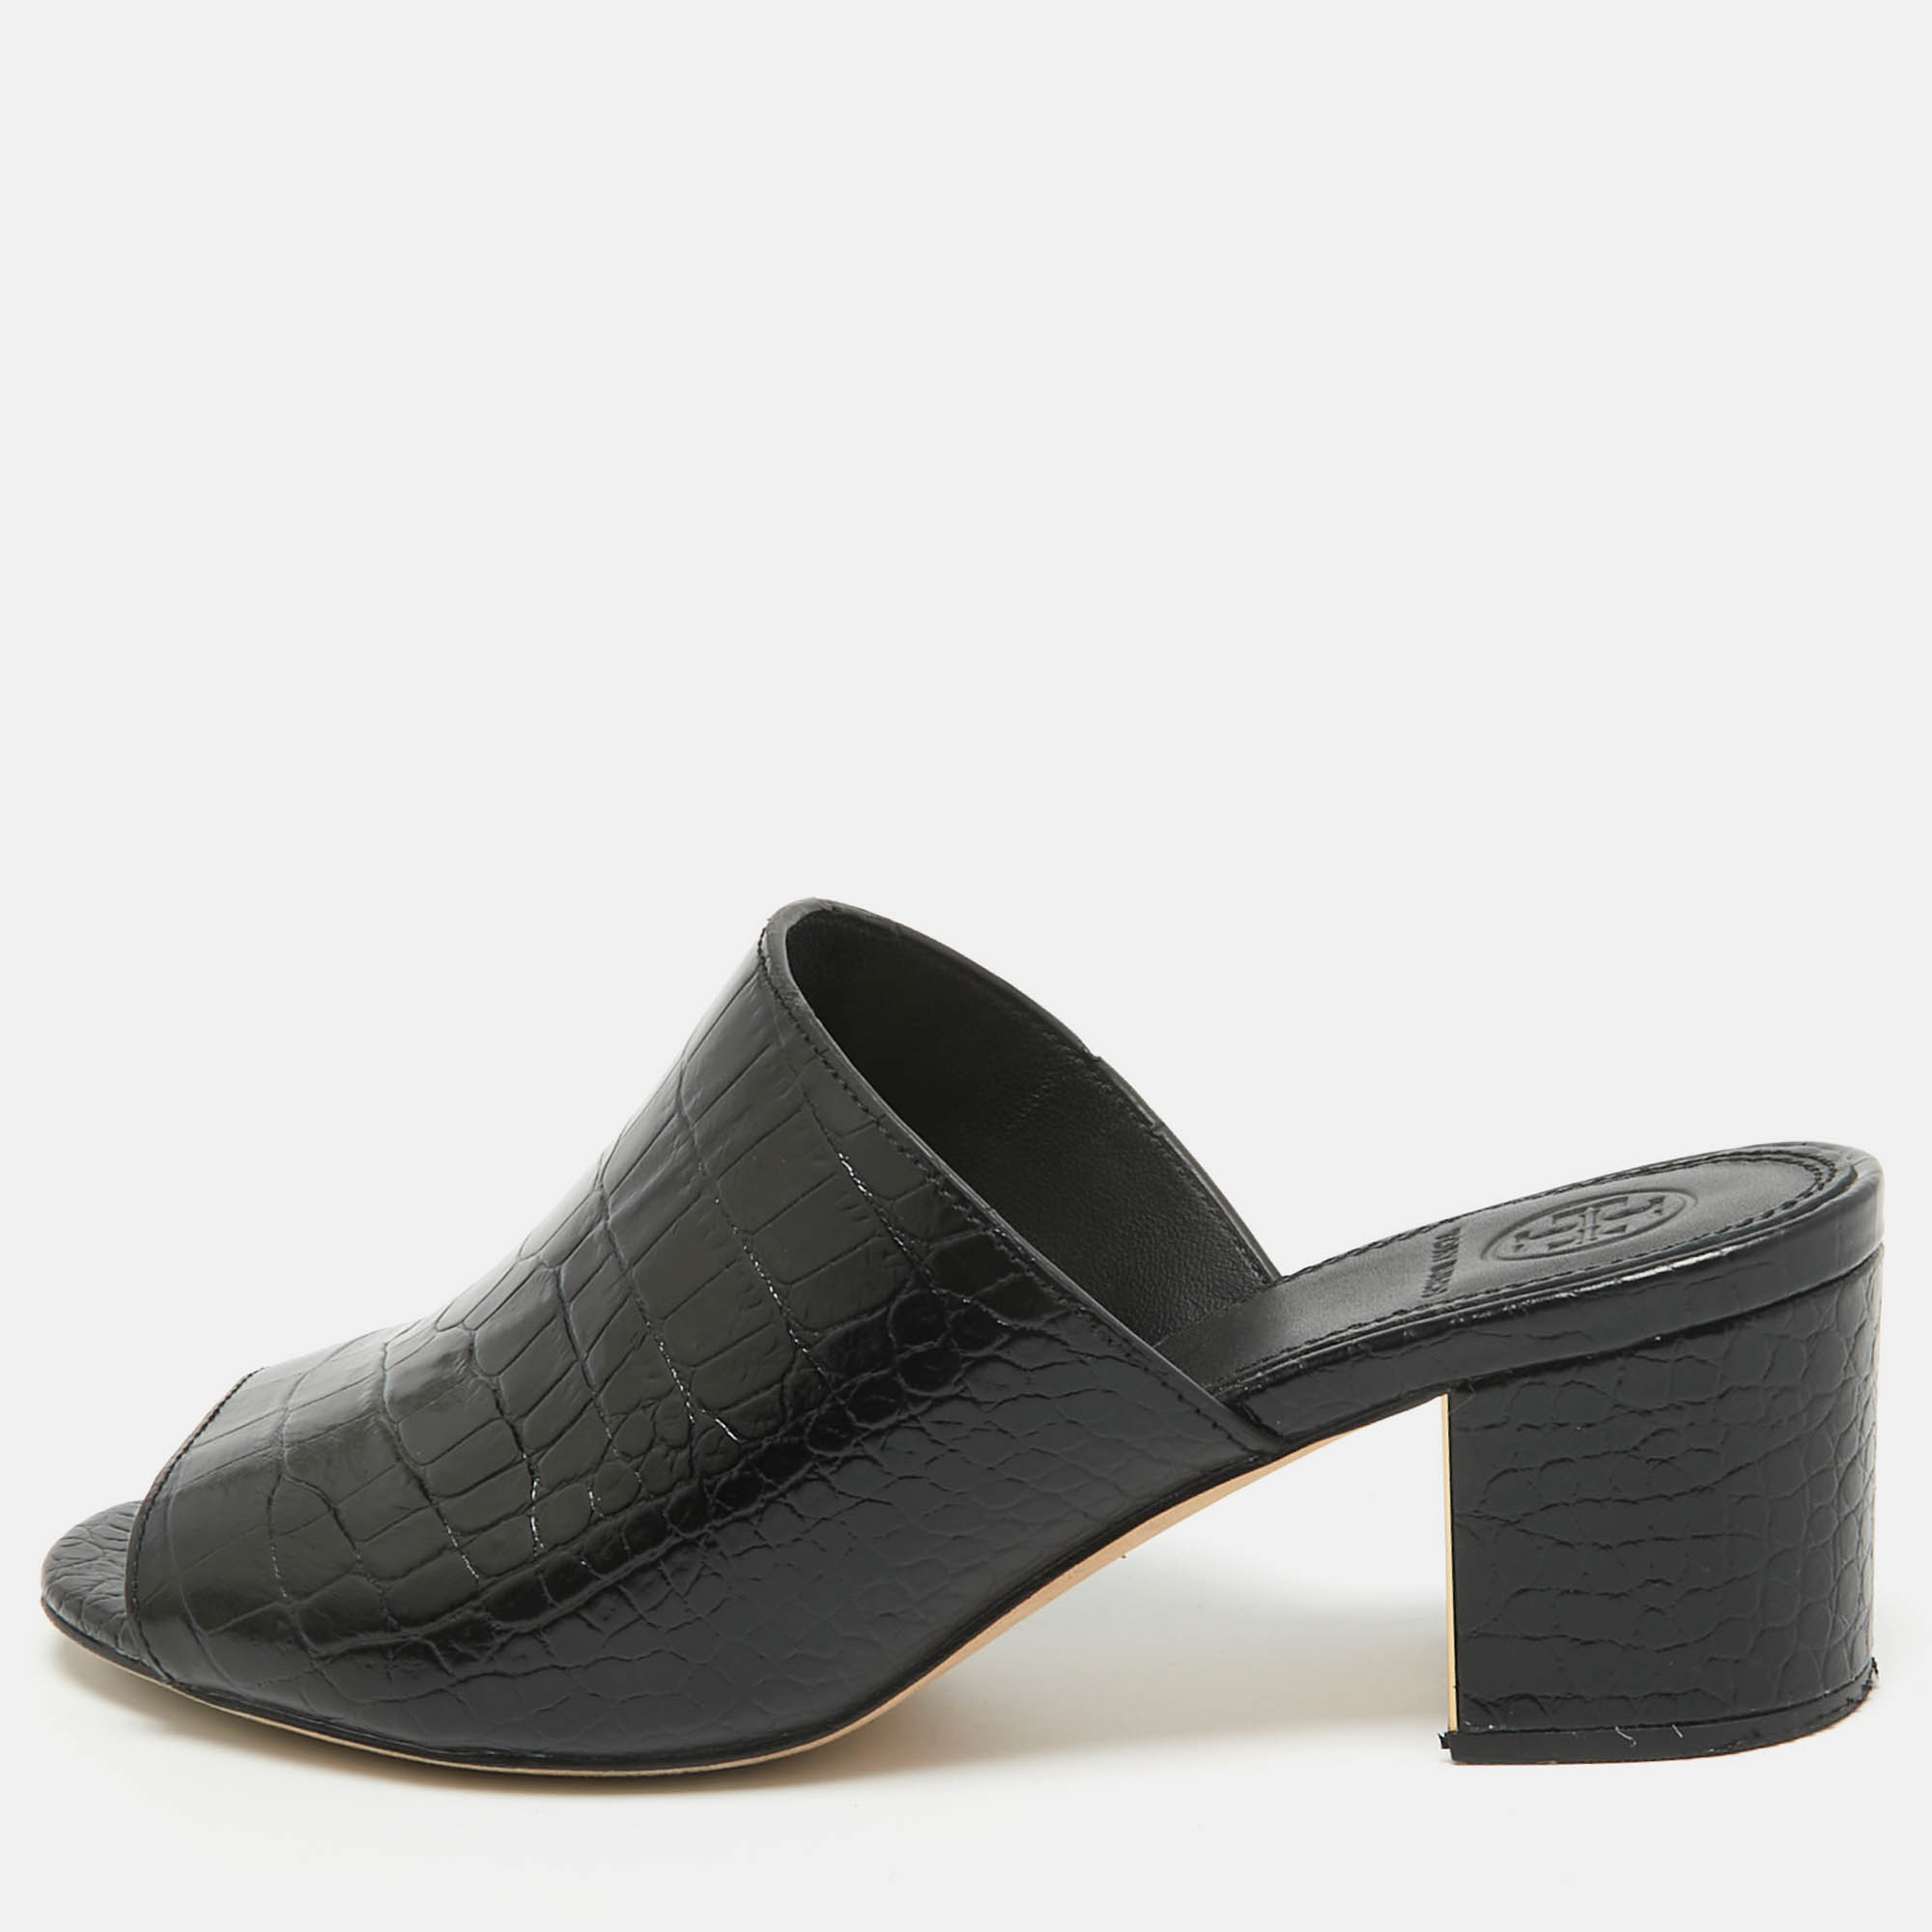 You can count on these designer mules to complete a summer look. They are crafted beautifully and designed to offer the right fit and a comfortable lift.